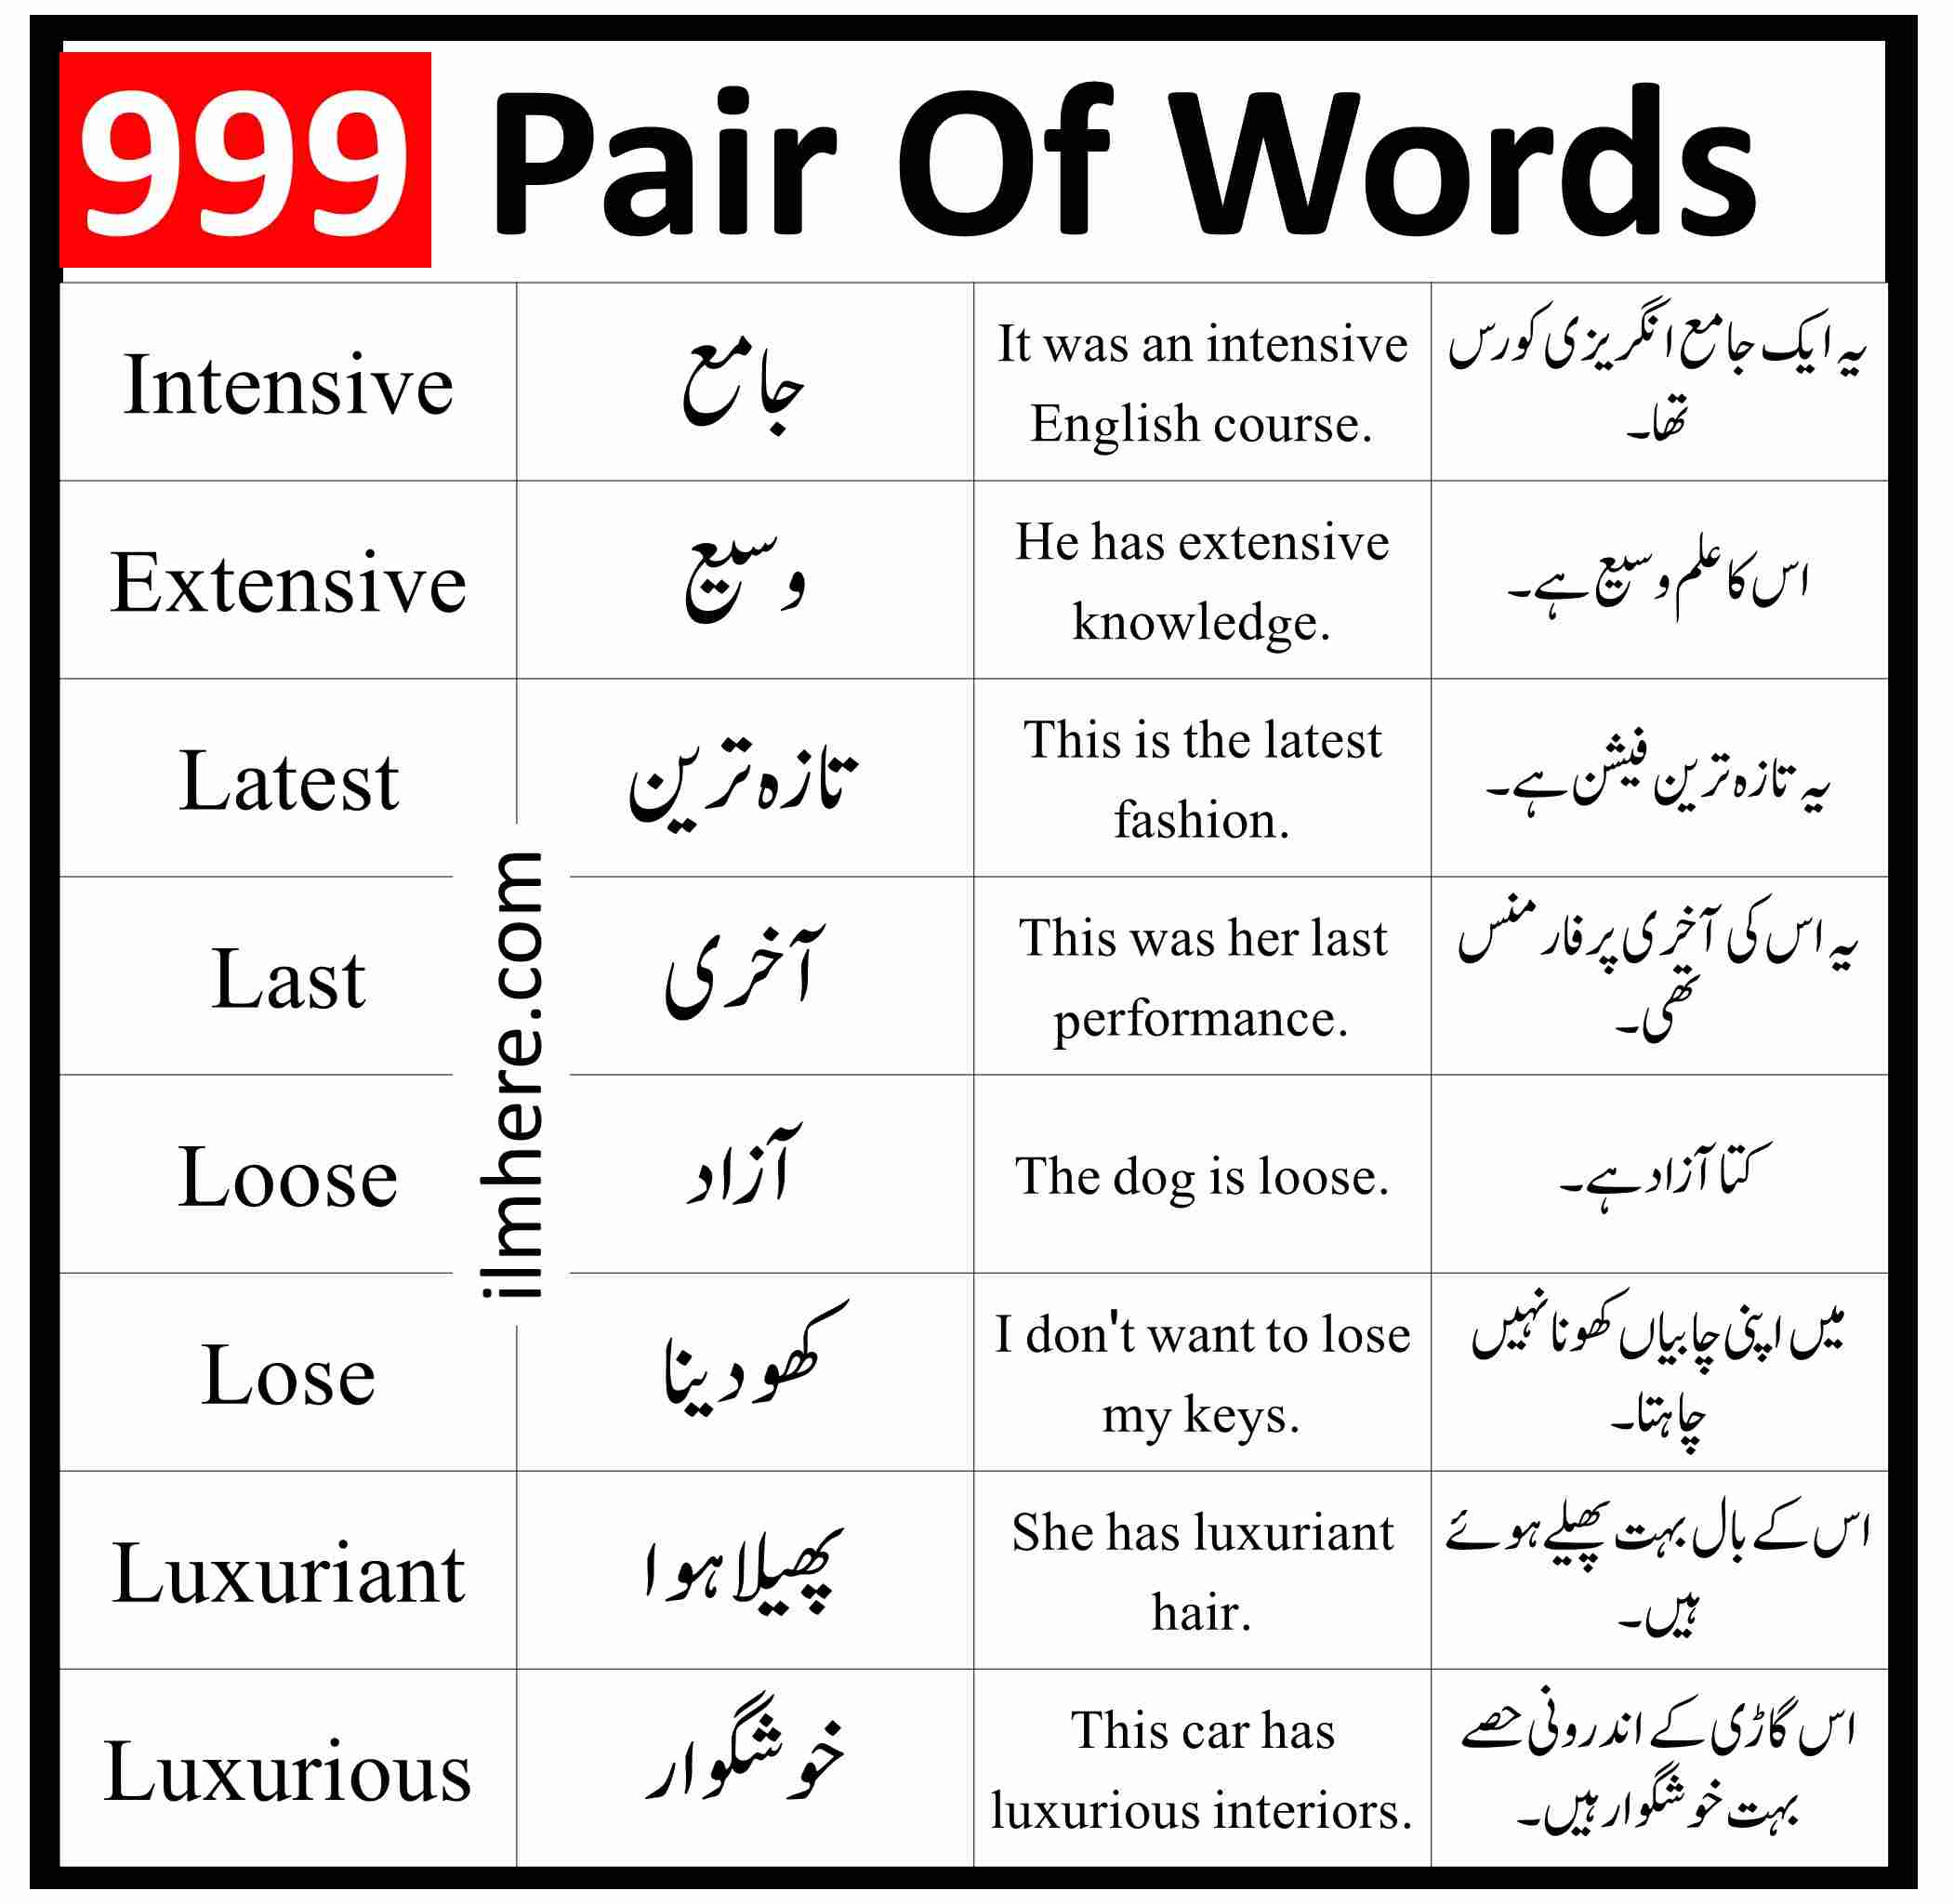 999 Pair of Words with Meaning and Sentences With Pictures